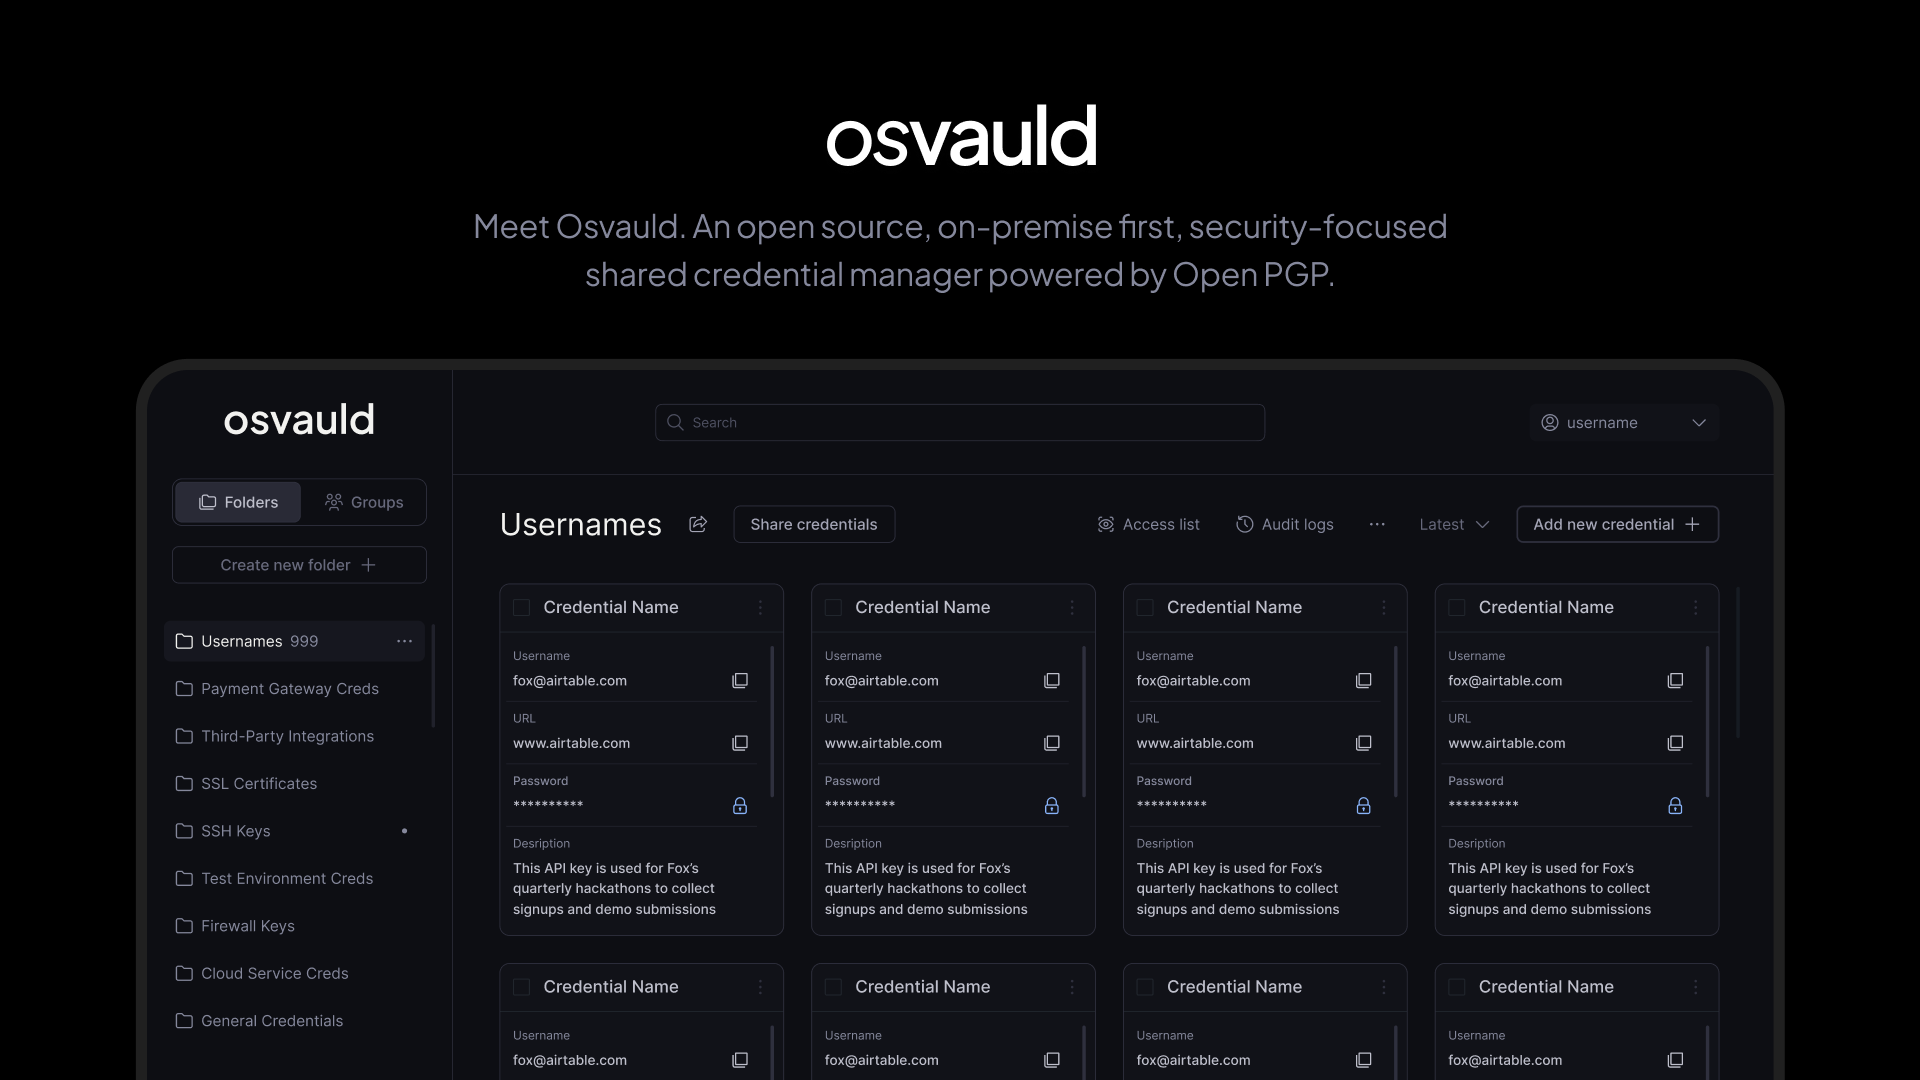 osvauld - An open-source, on-prem shared credential manager